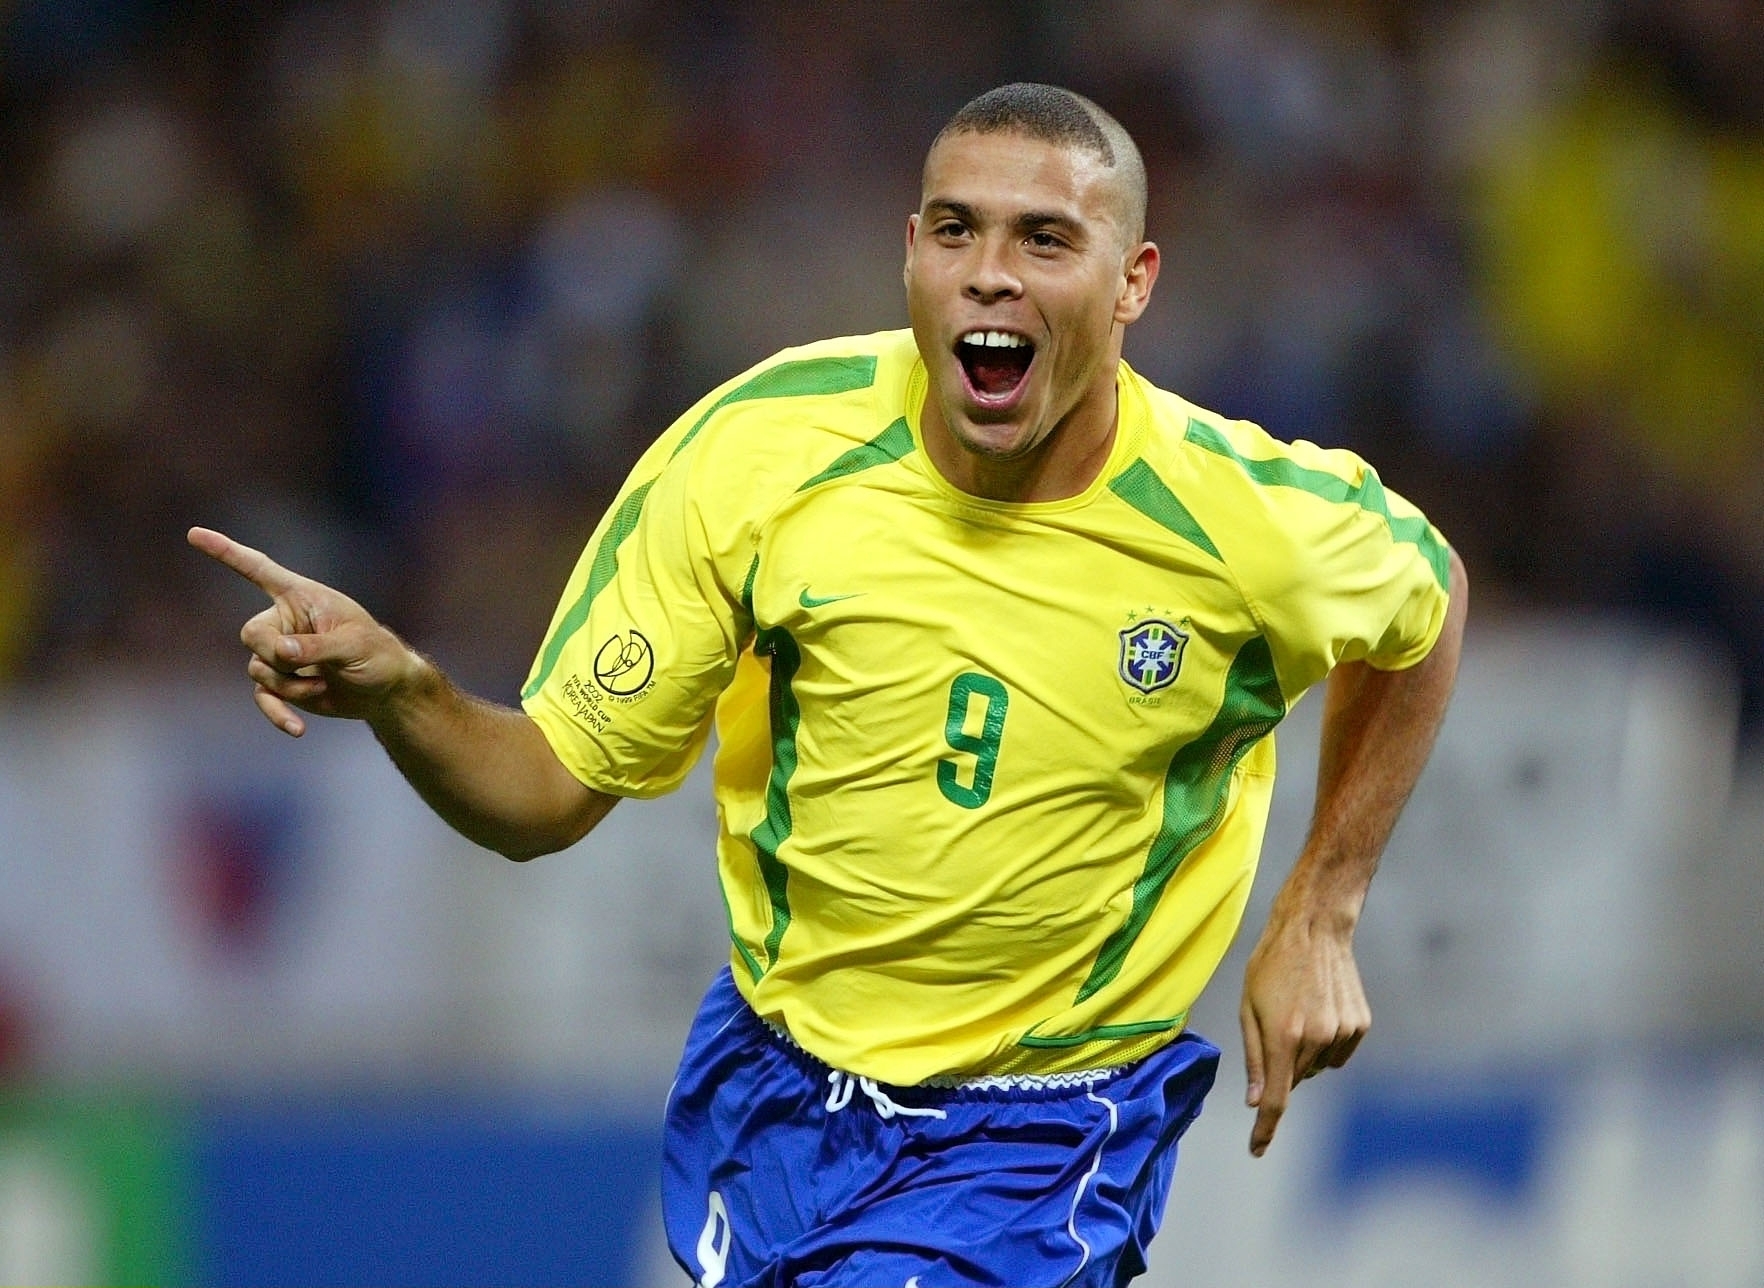 Ronaldo celebrates after scoring for Brazil at the 2002 World Cup.